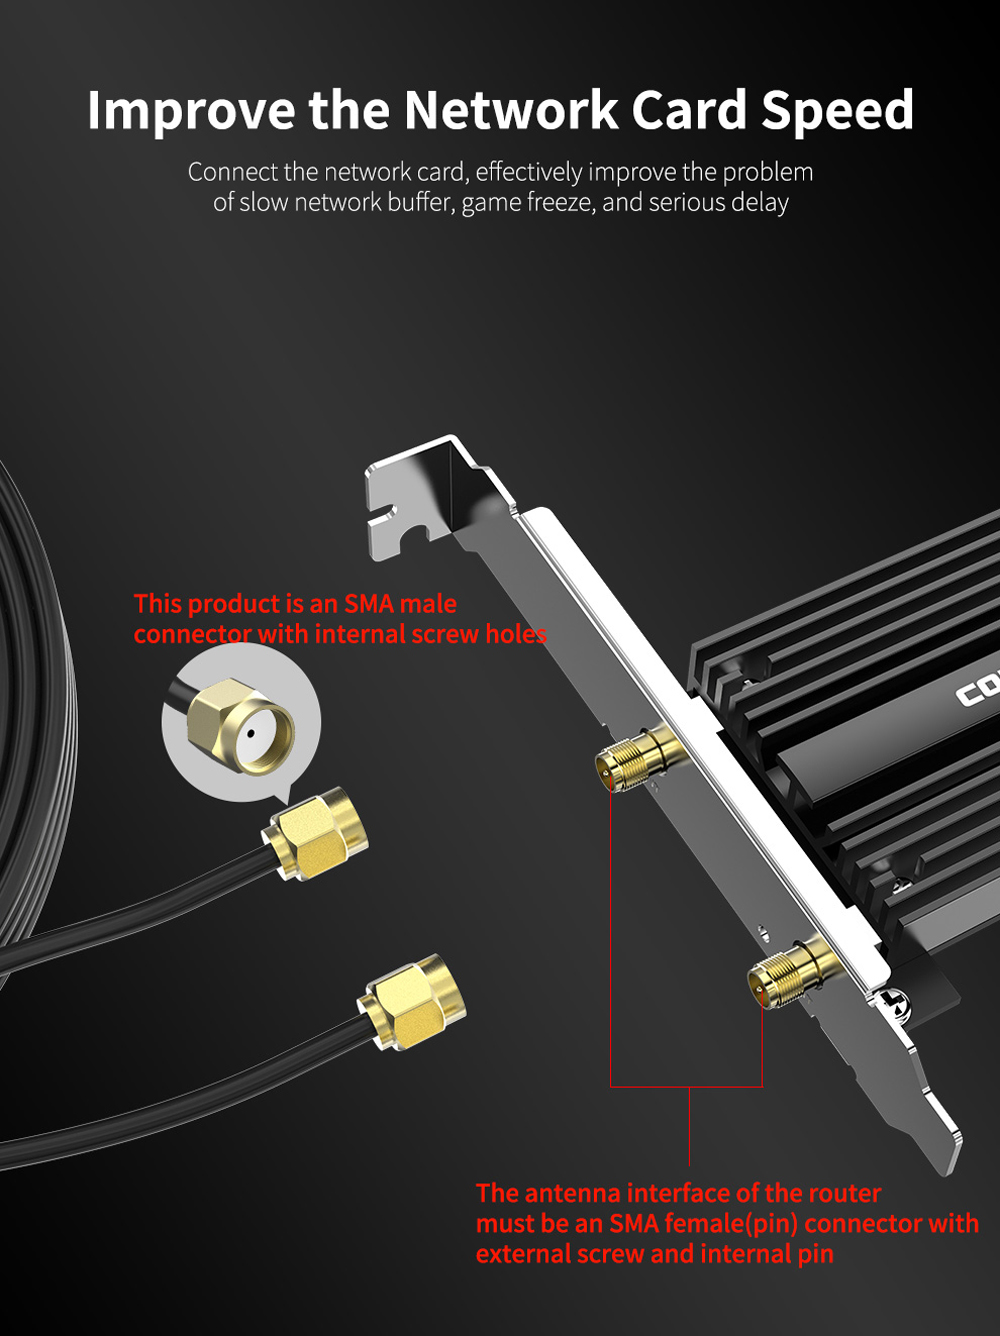 Comfast 2.4G + 5G Dual Band 6dbi Wireless High Gain Antenna Booster Base RP-SMA Connector for Wireless Router Network Card